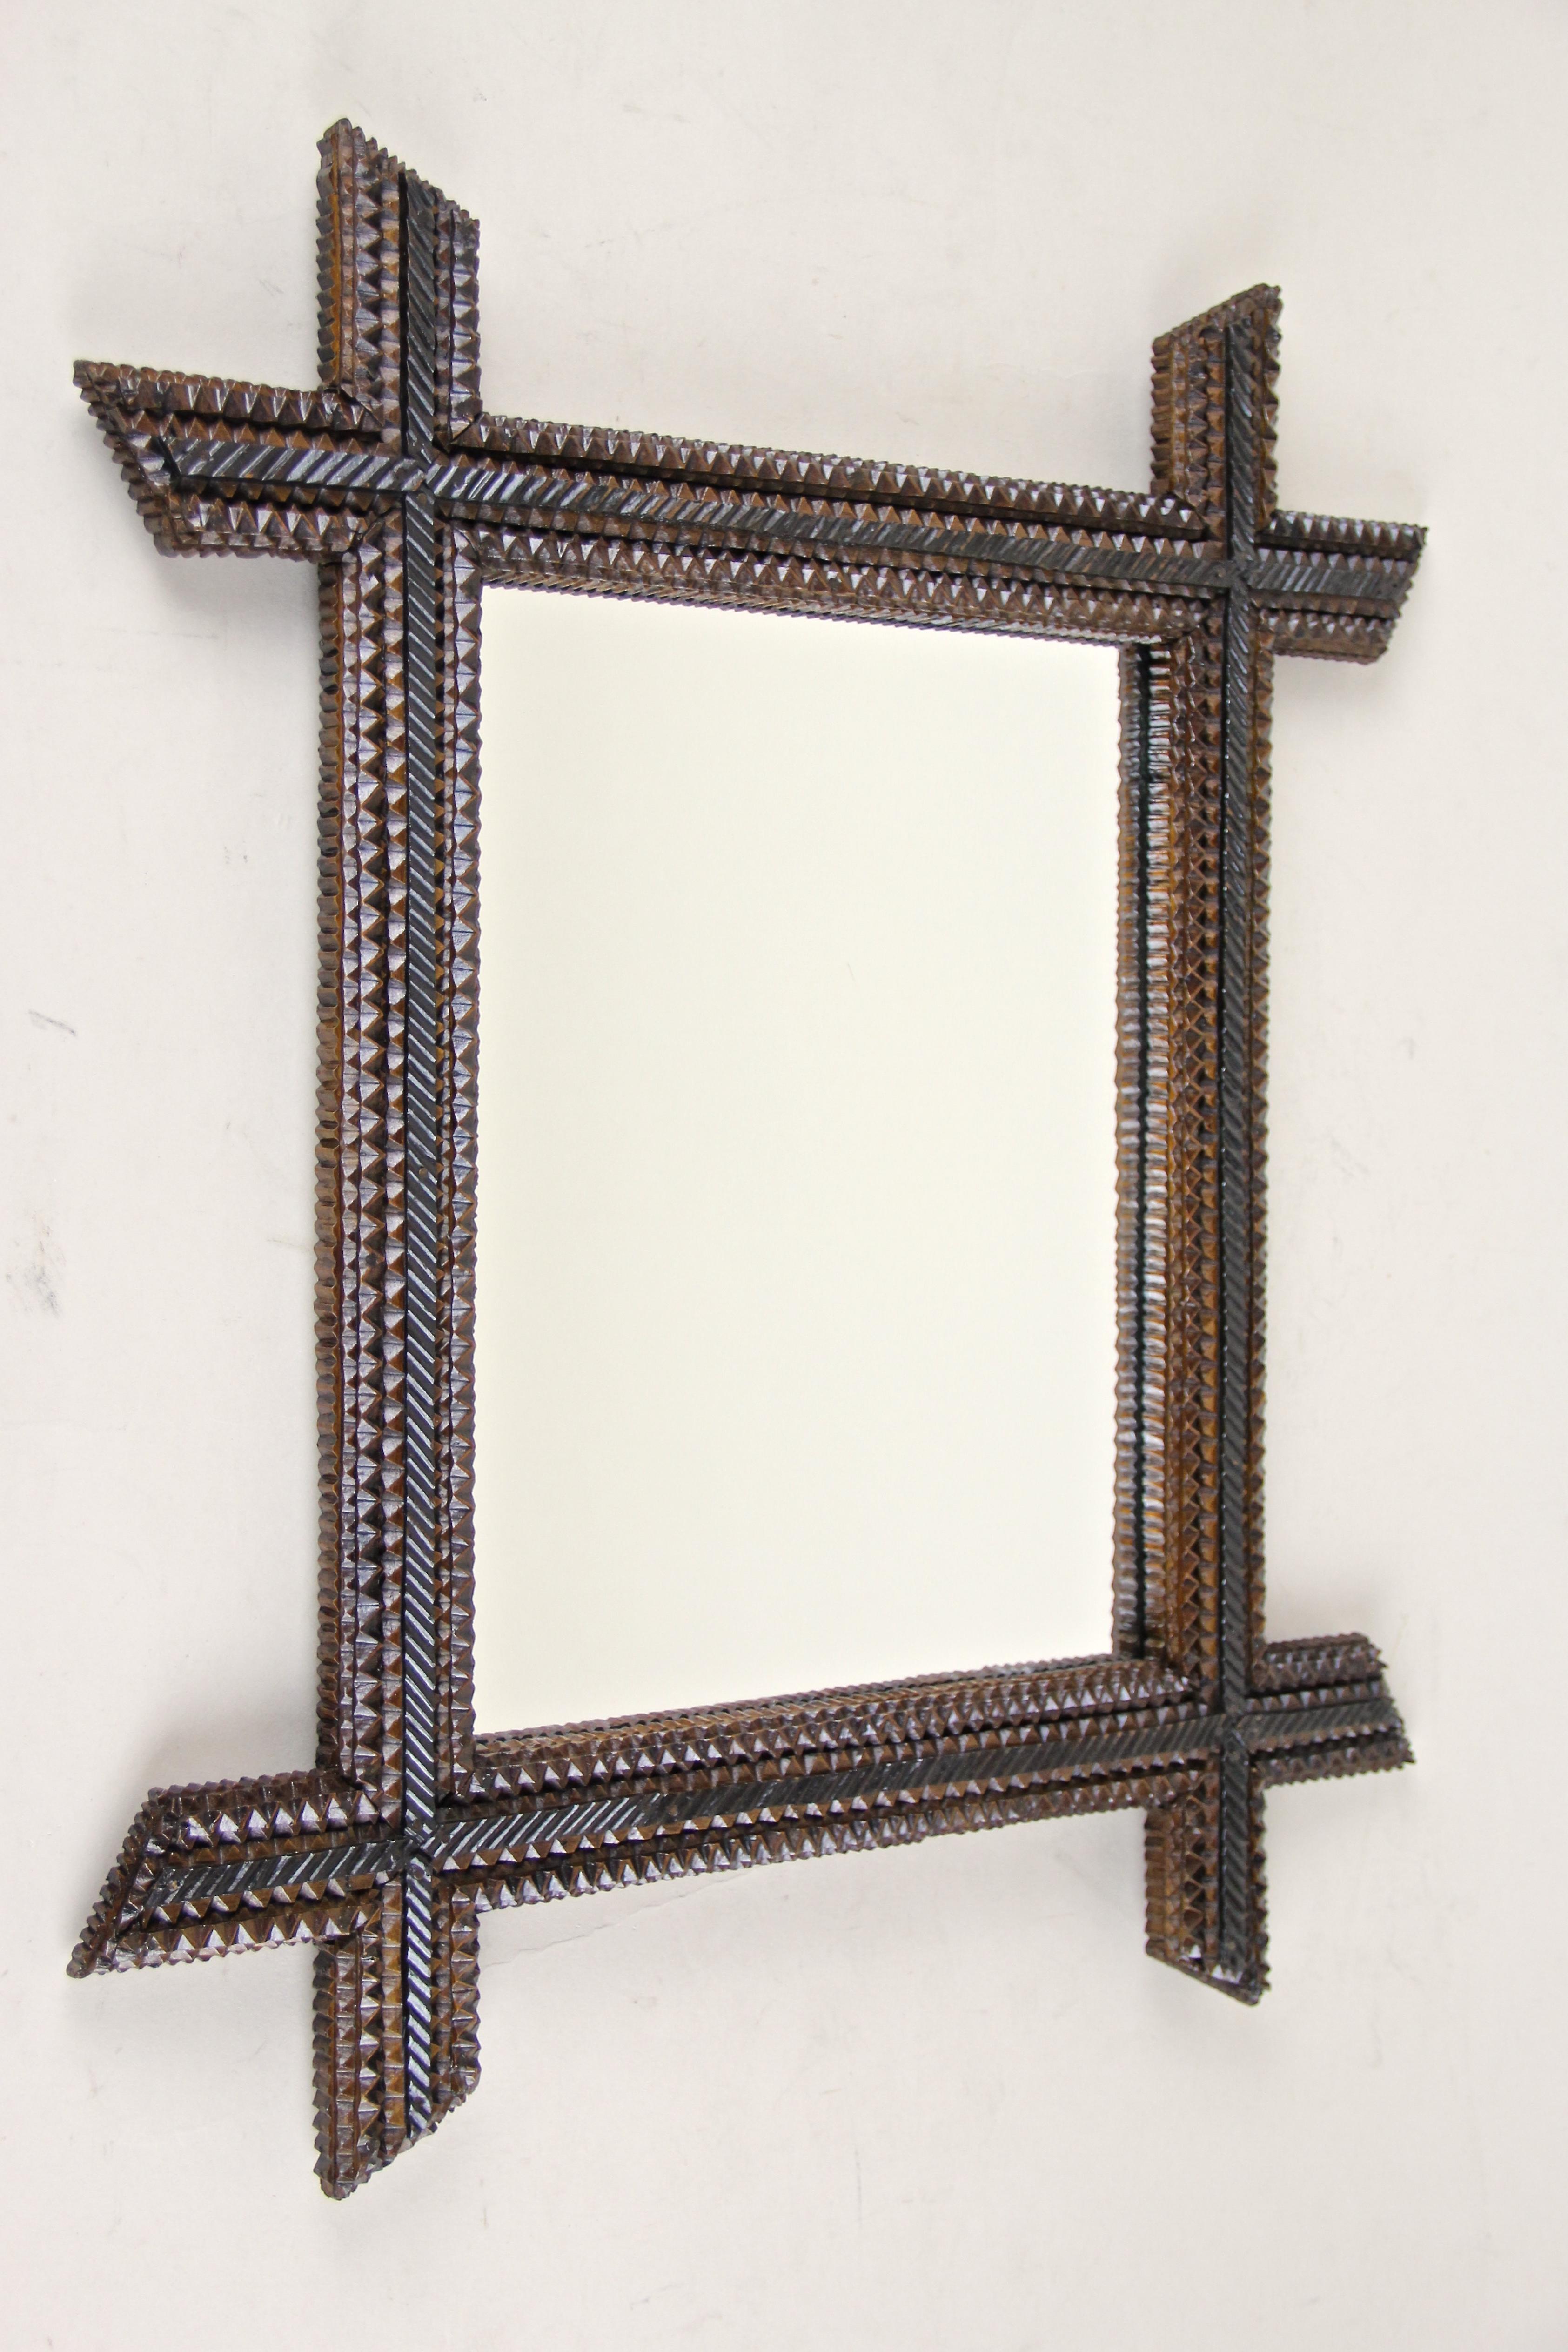 Fantastic chip carved Tramp Art wall mirror in our high-demand Tramp Art collection. This charming mid-sized rustic mirror comes from Austria around 1880 and convinces by its great variety of different chip carvings. Protruding, beveled corners and